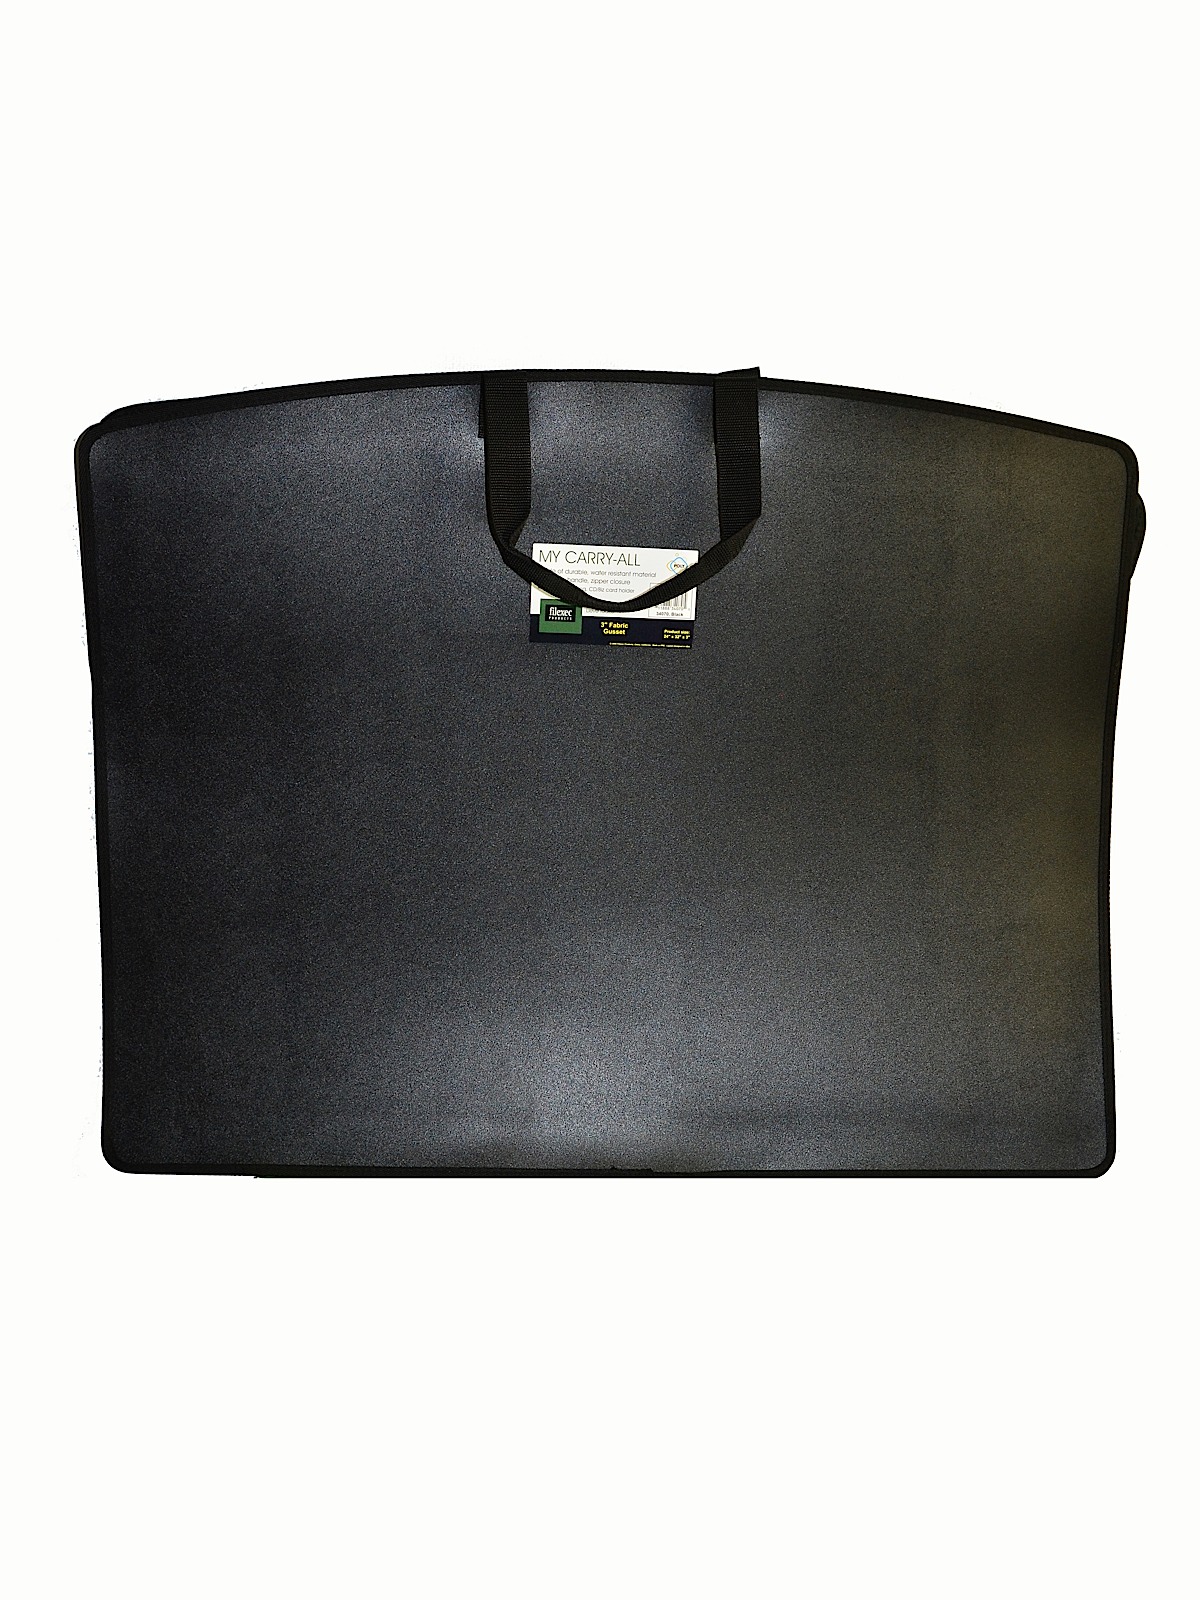 My Carry All Tote 24 In. X 32 In. Black